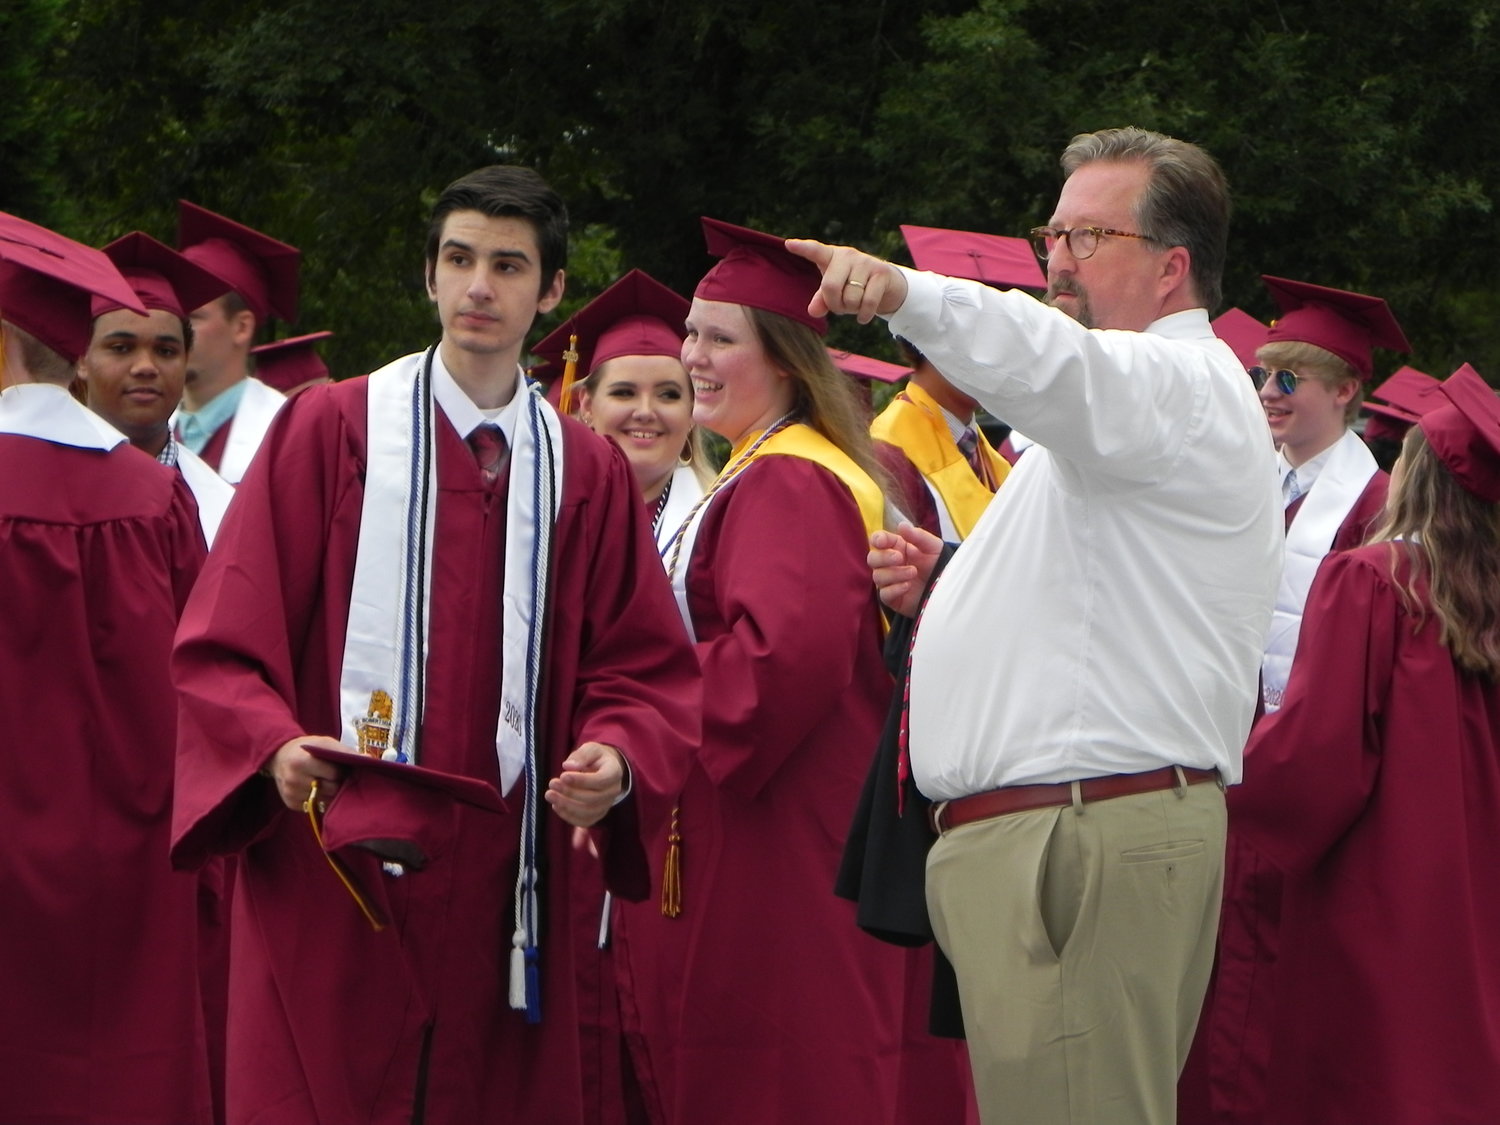 William Peck directs students prior to Robertsdale High School’s graduation last June.